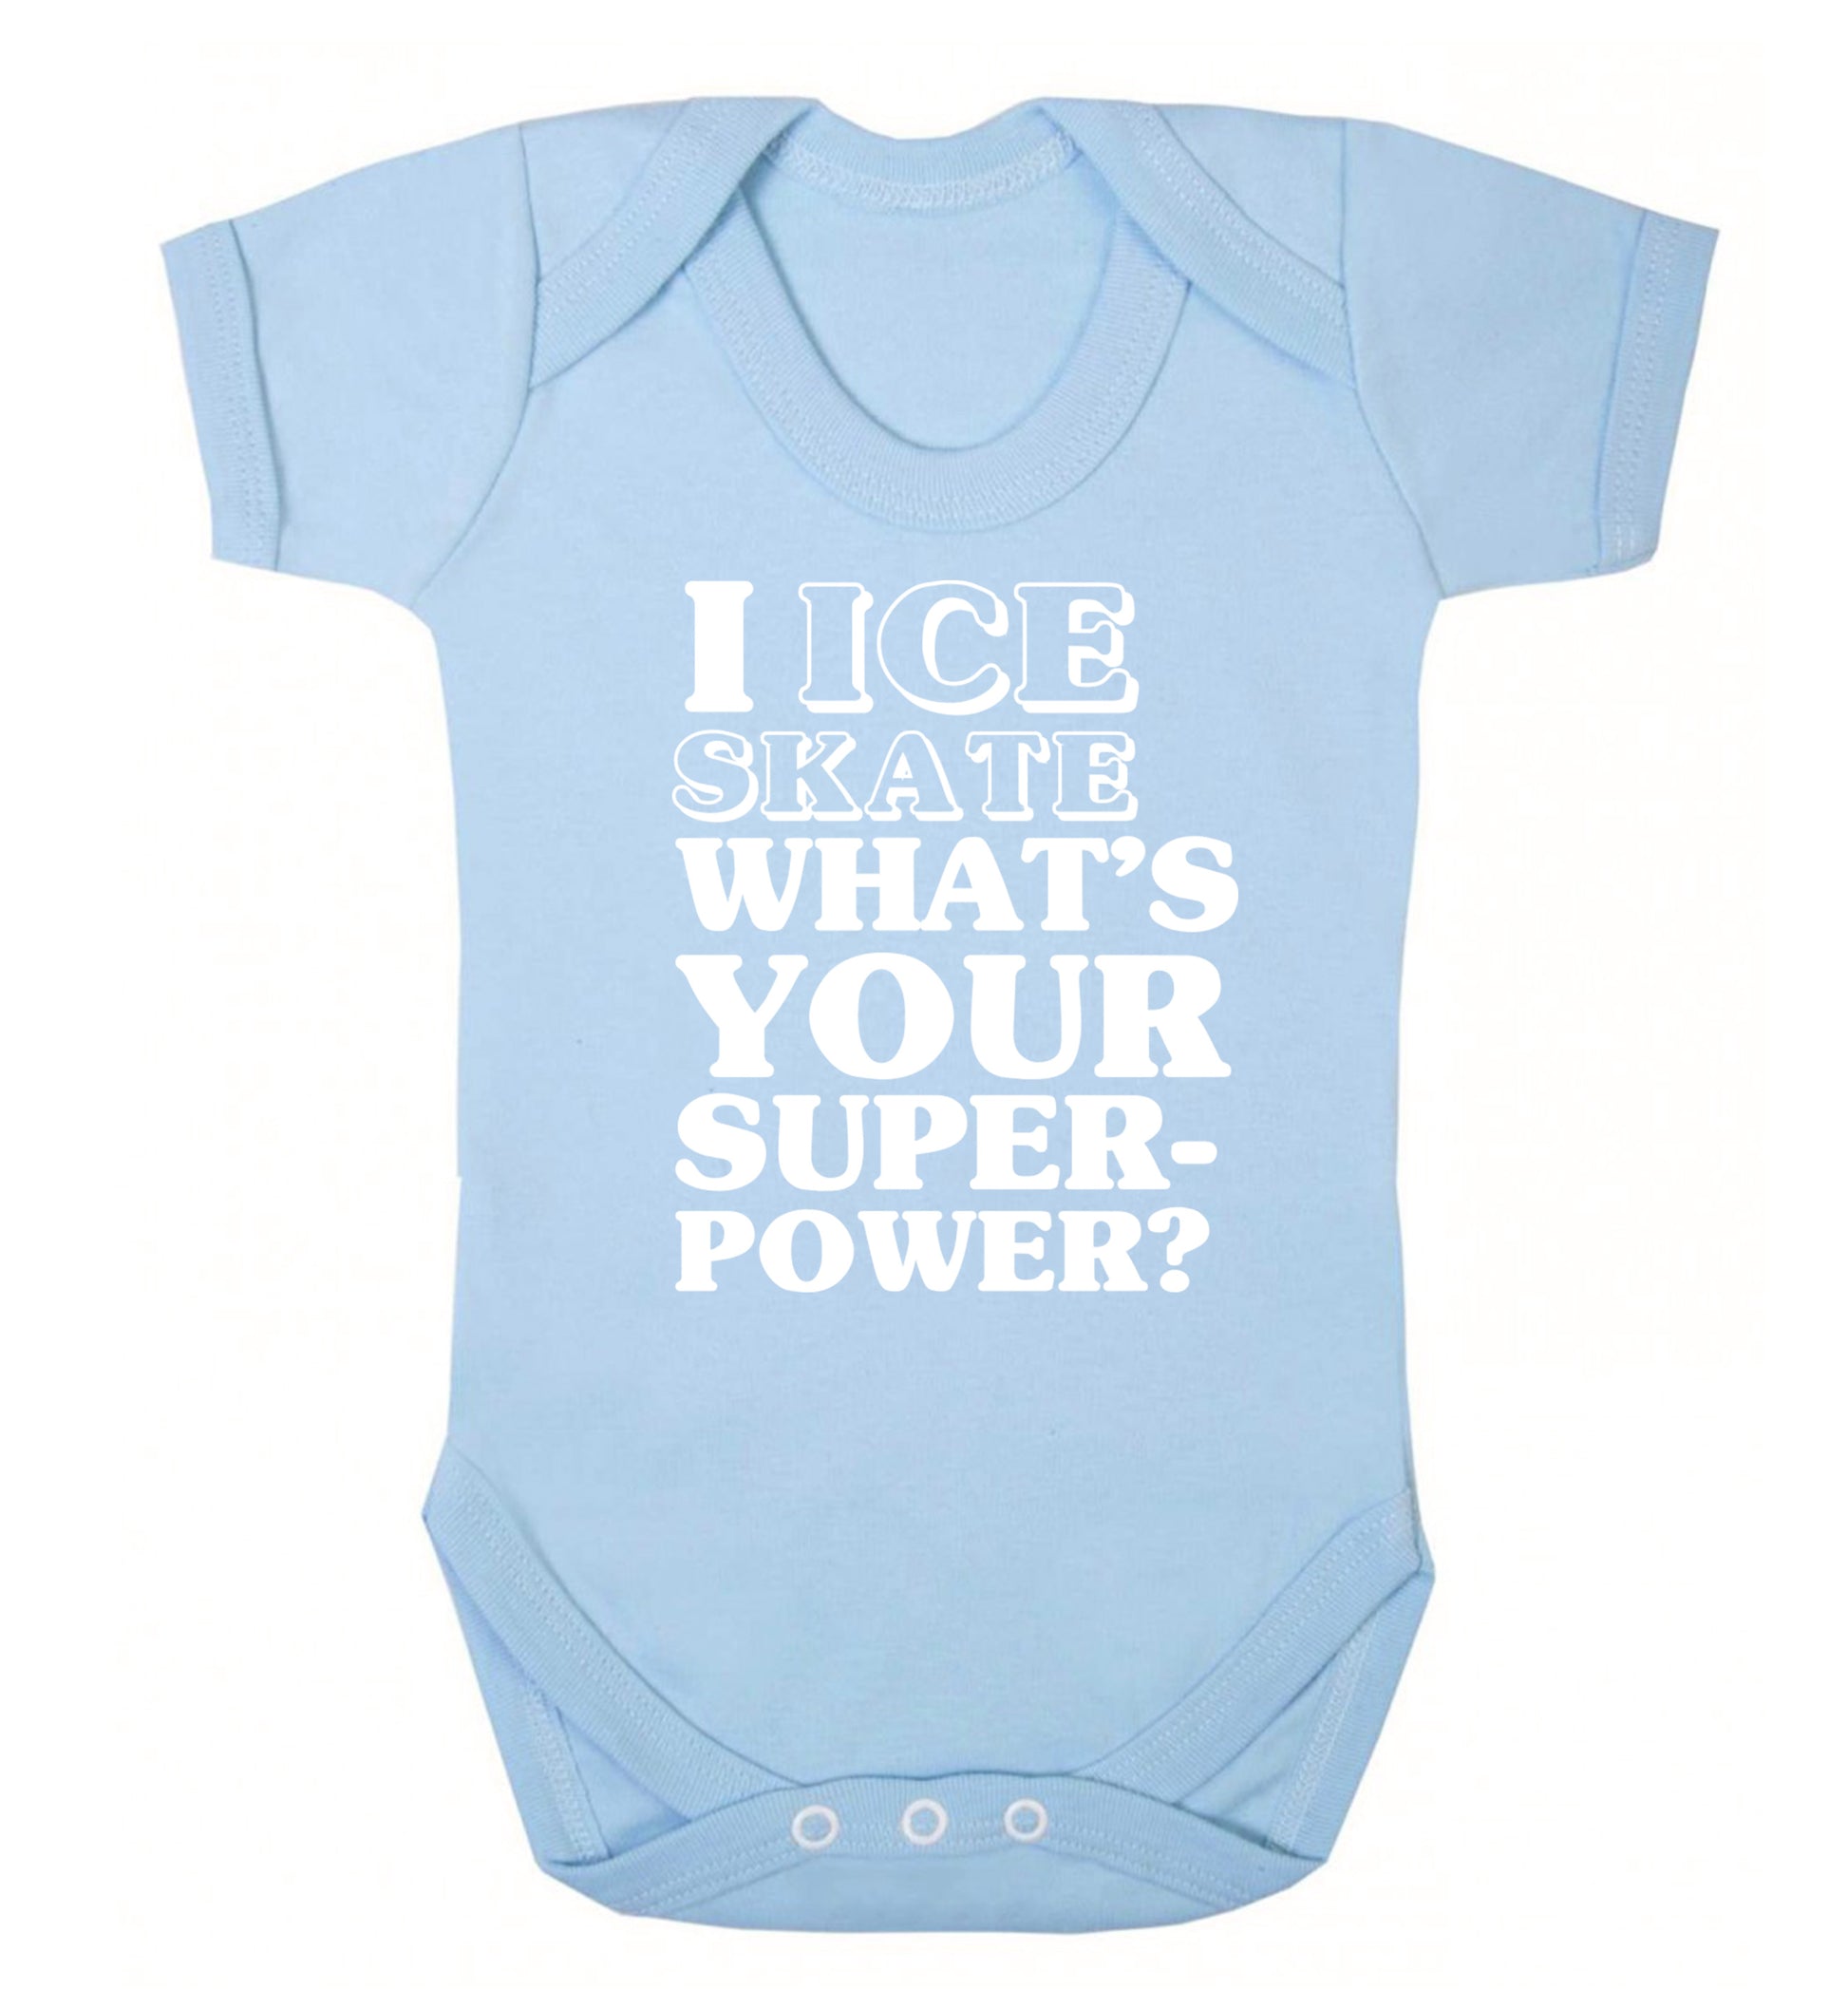 I ice skate what's your superpower? Baby Vest pale blue 18-24 months